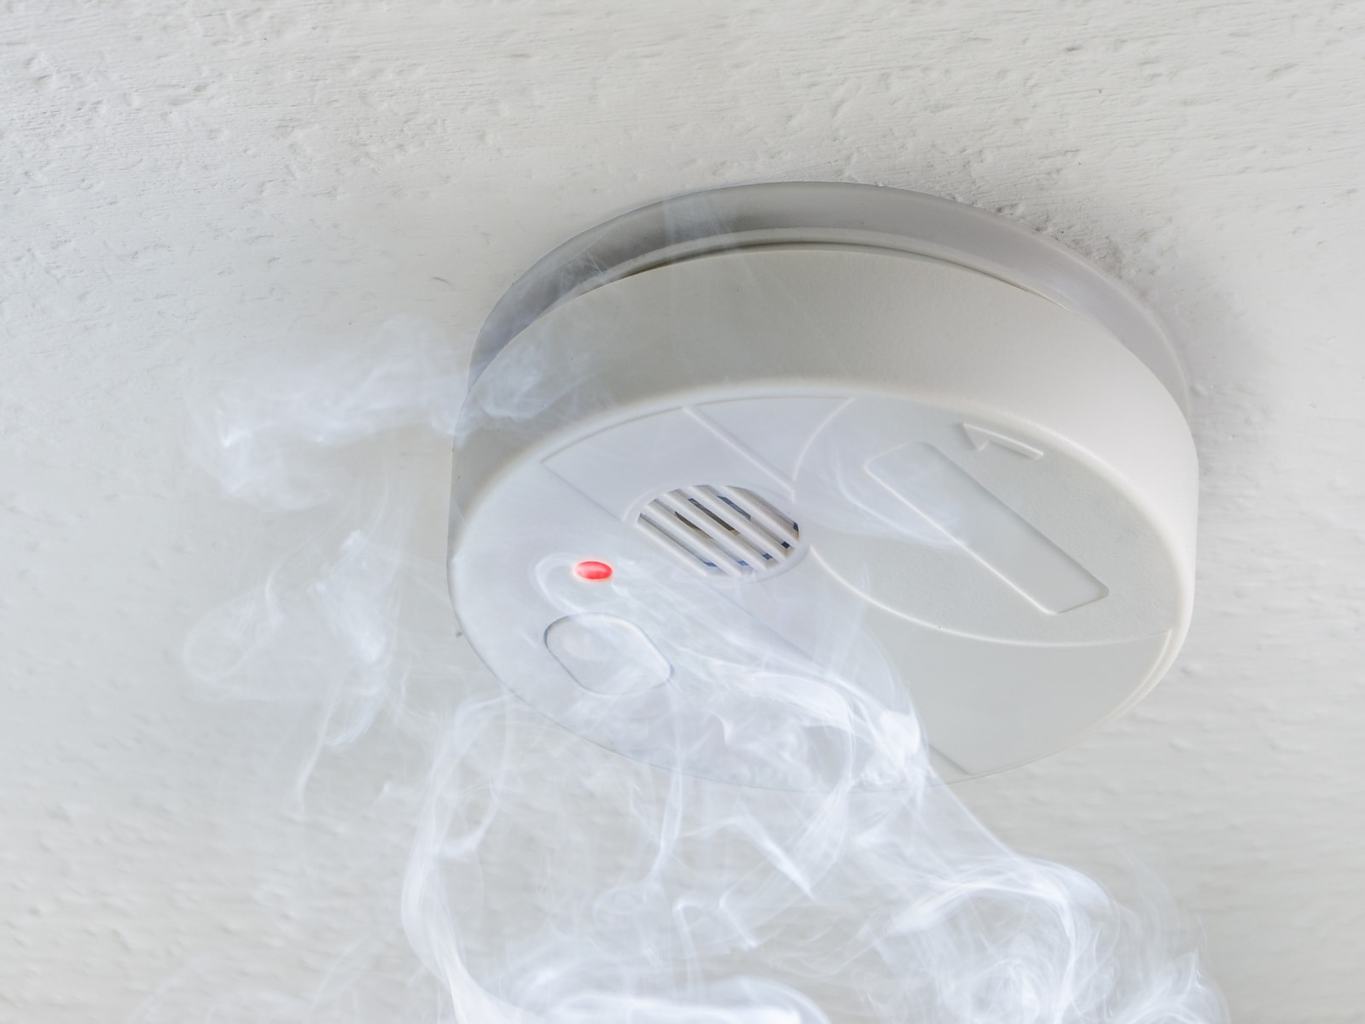 smoke detector, tips for fire safety